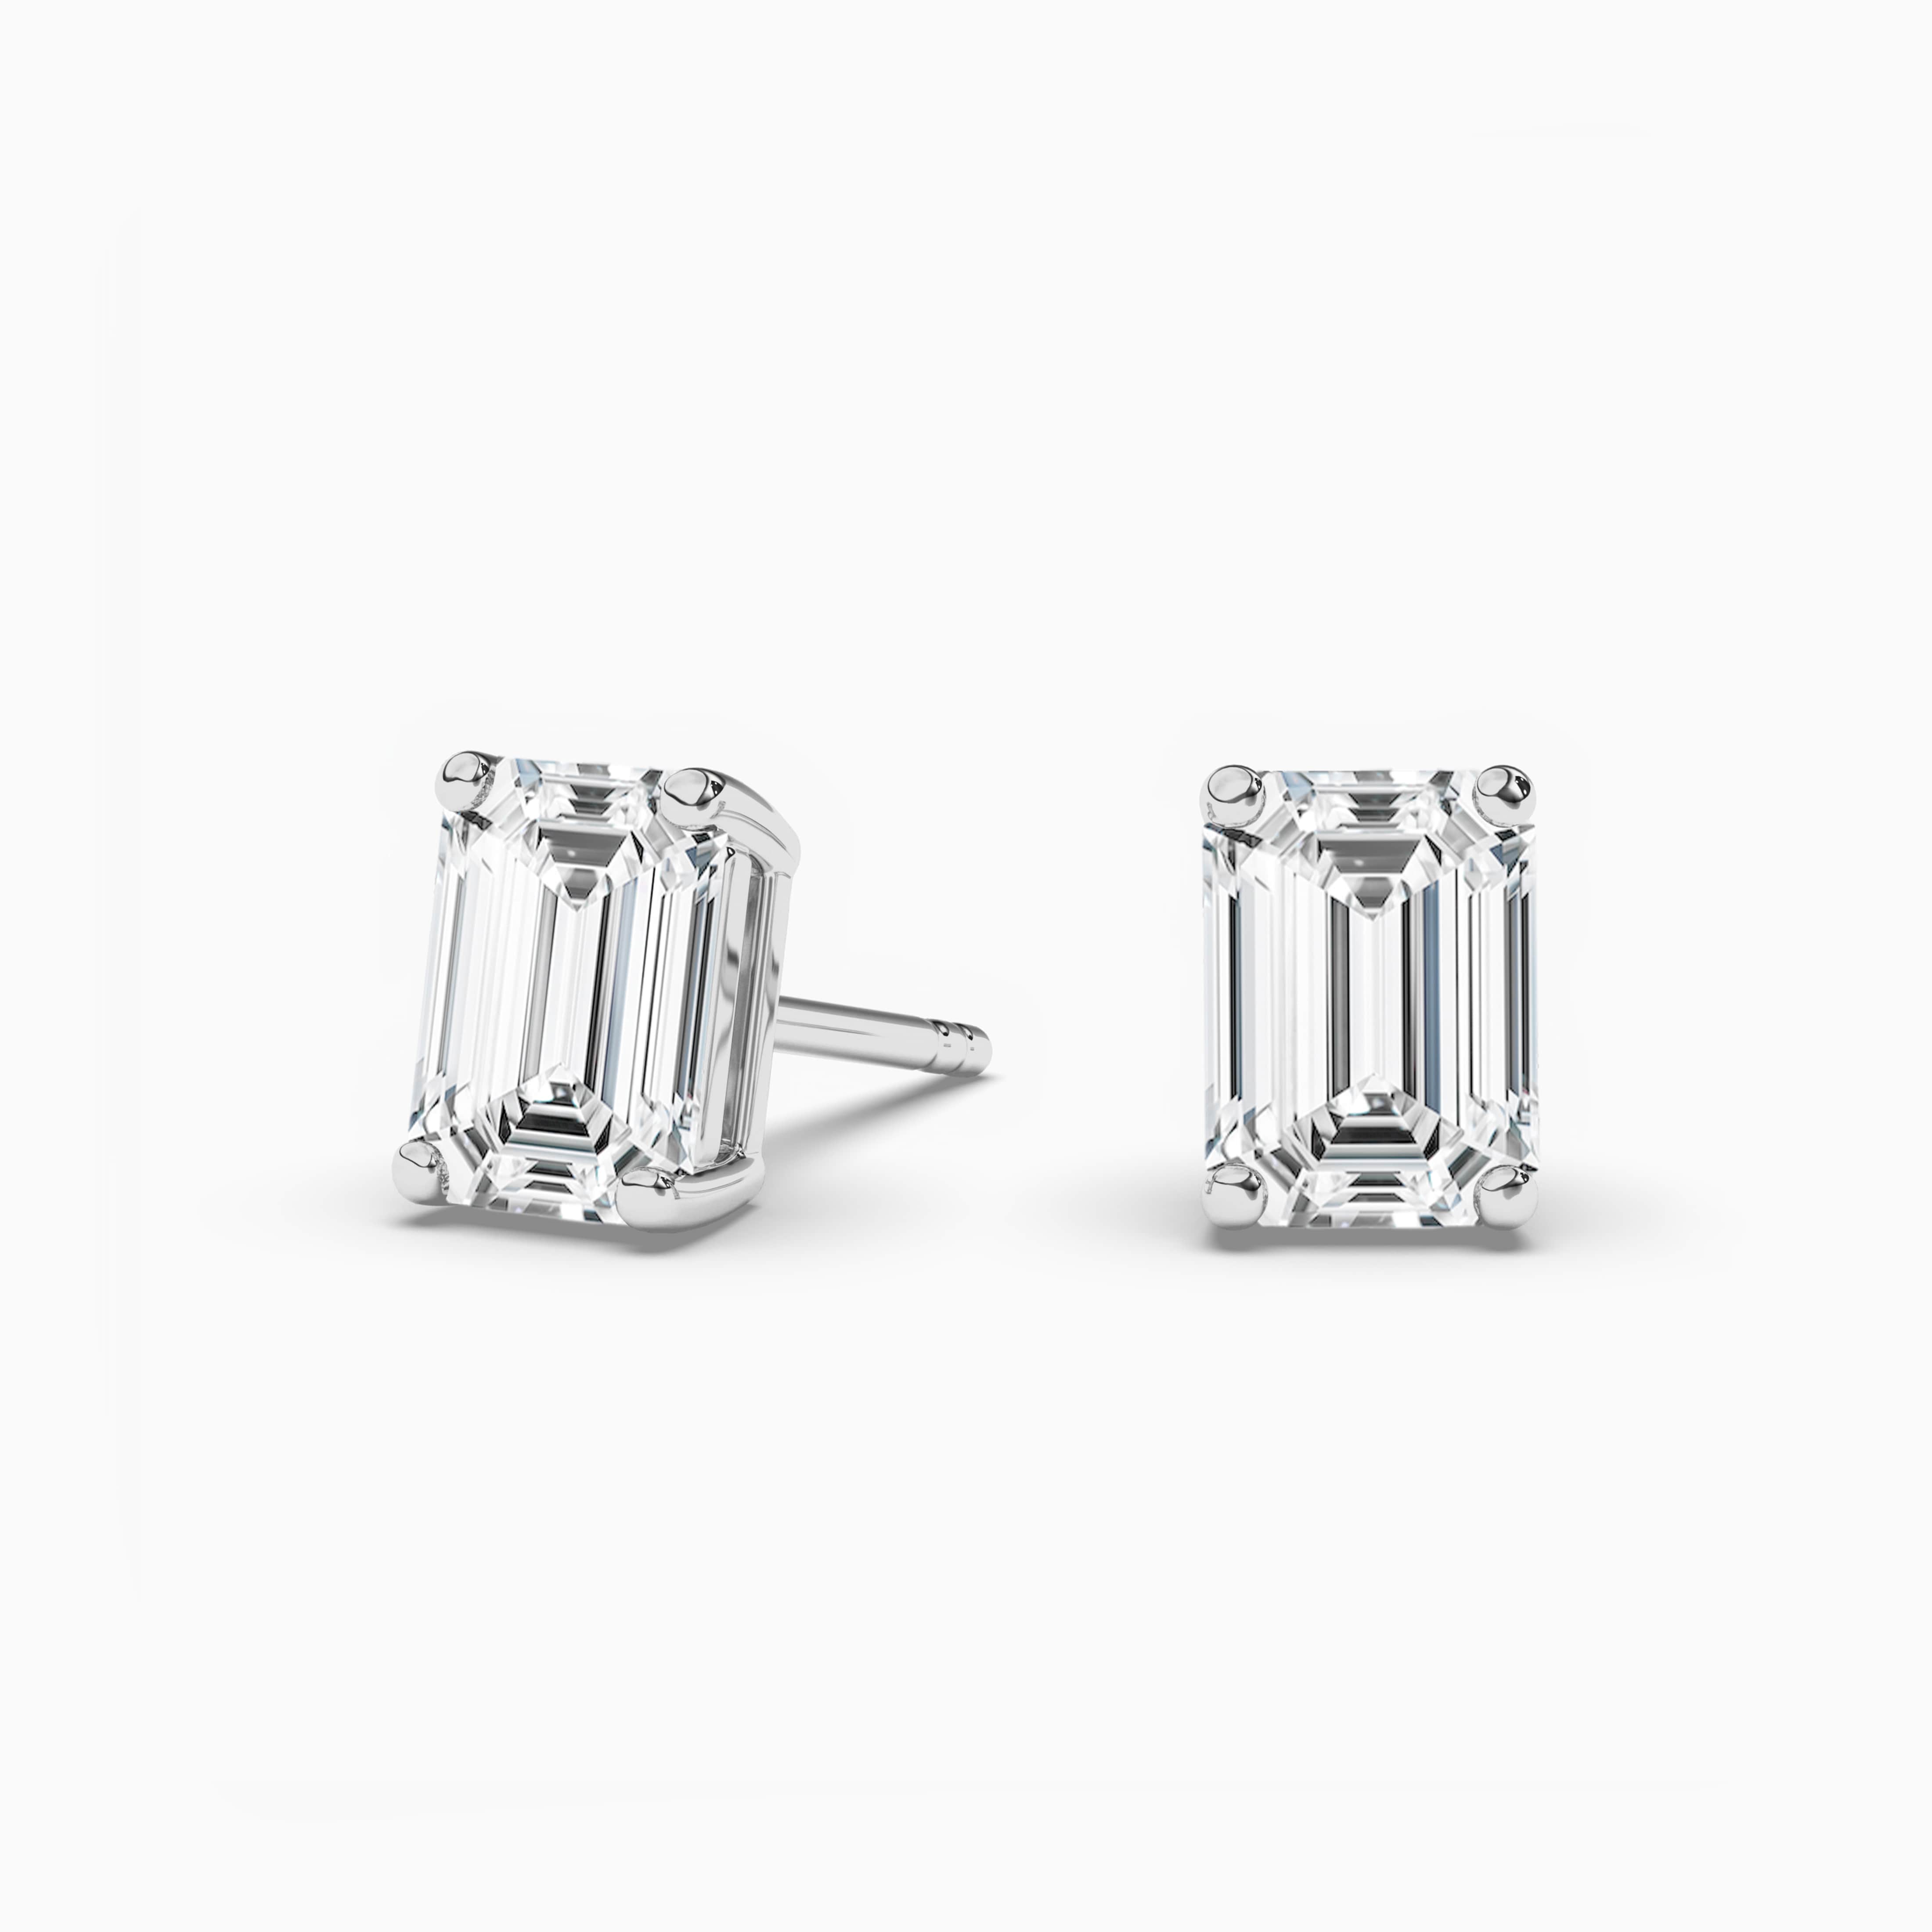 Emerald Cut White Gold Moissanite Solitaire Stud Earrings